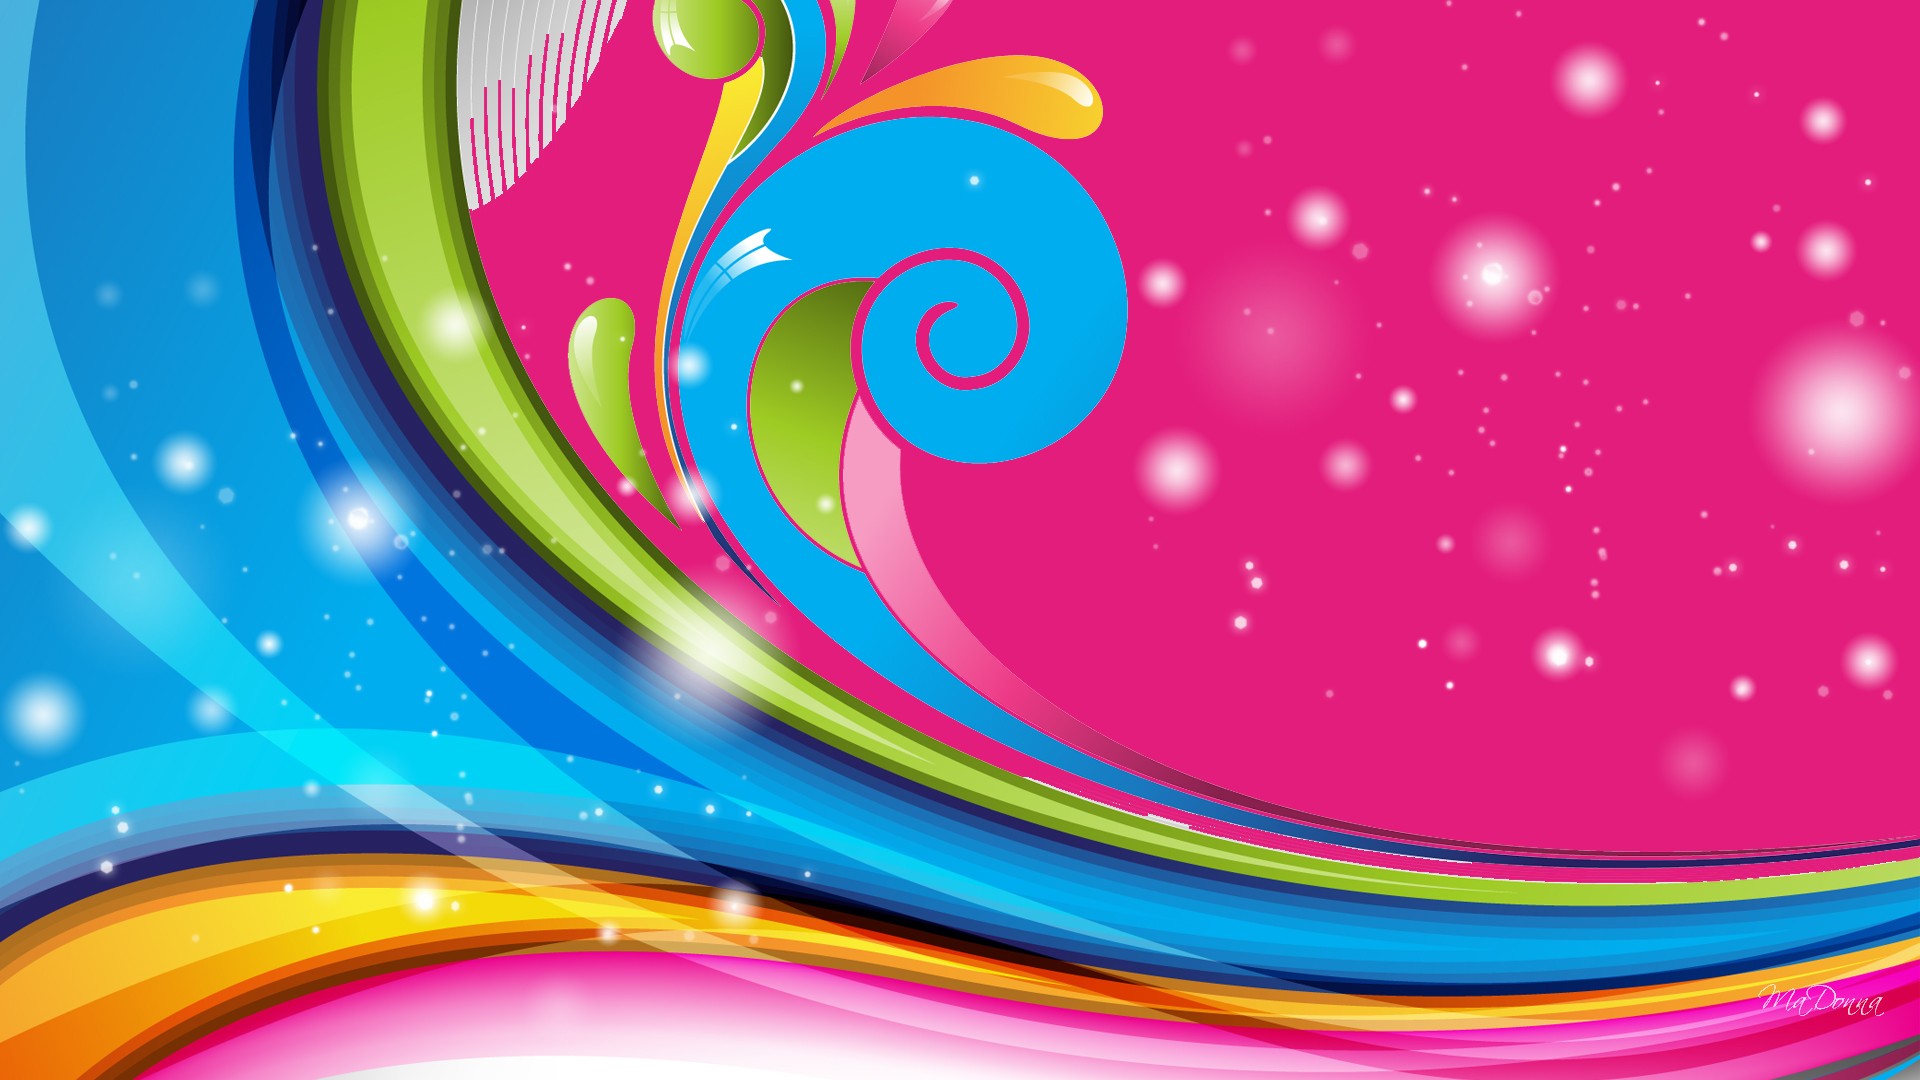 Colorful wallpapers for desktop 13 1920x1080